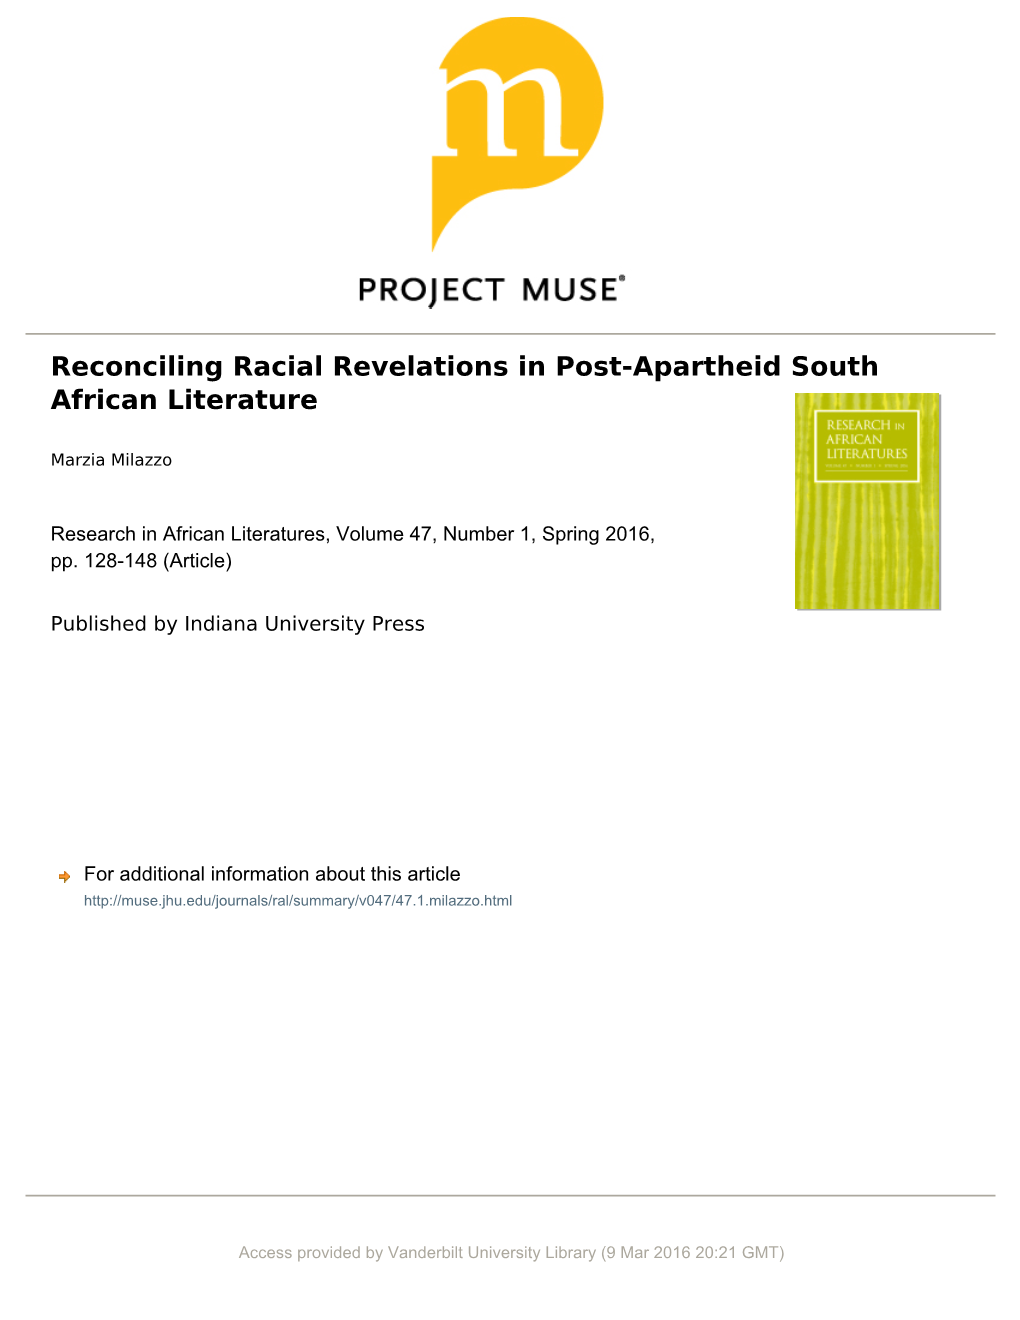 Reconciling Racial Revelations in Post-Apartheid South African Literature MARZIA MILAZZO Vanderbilt University Marzia.Milazzo@Vanderbilt.Edu